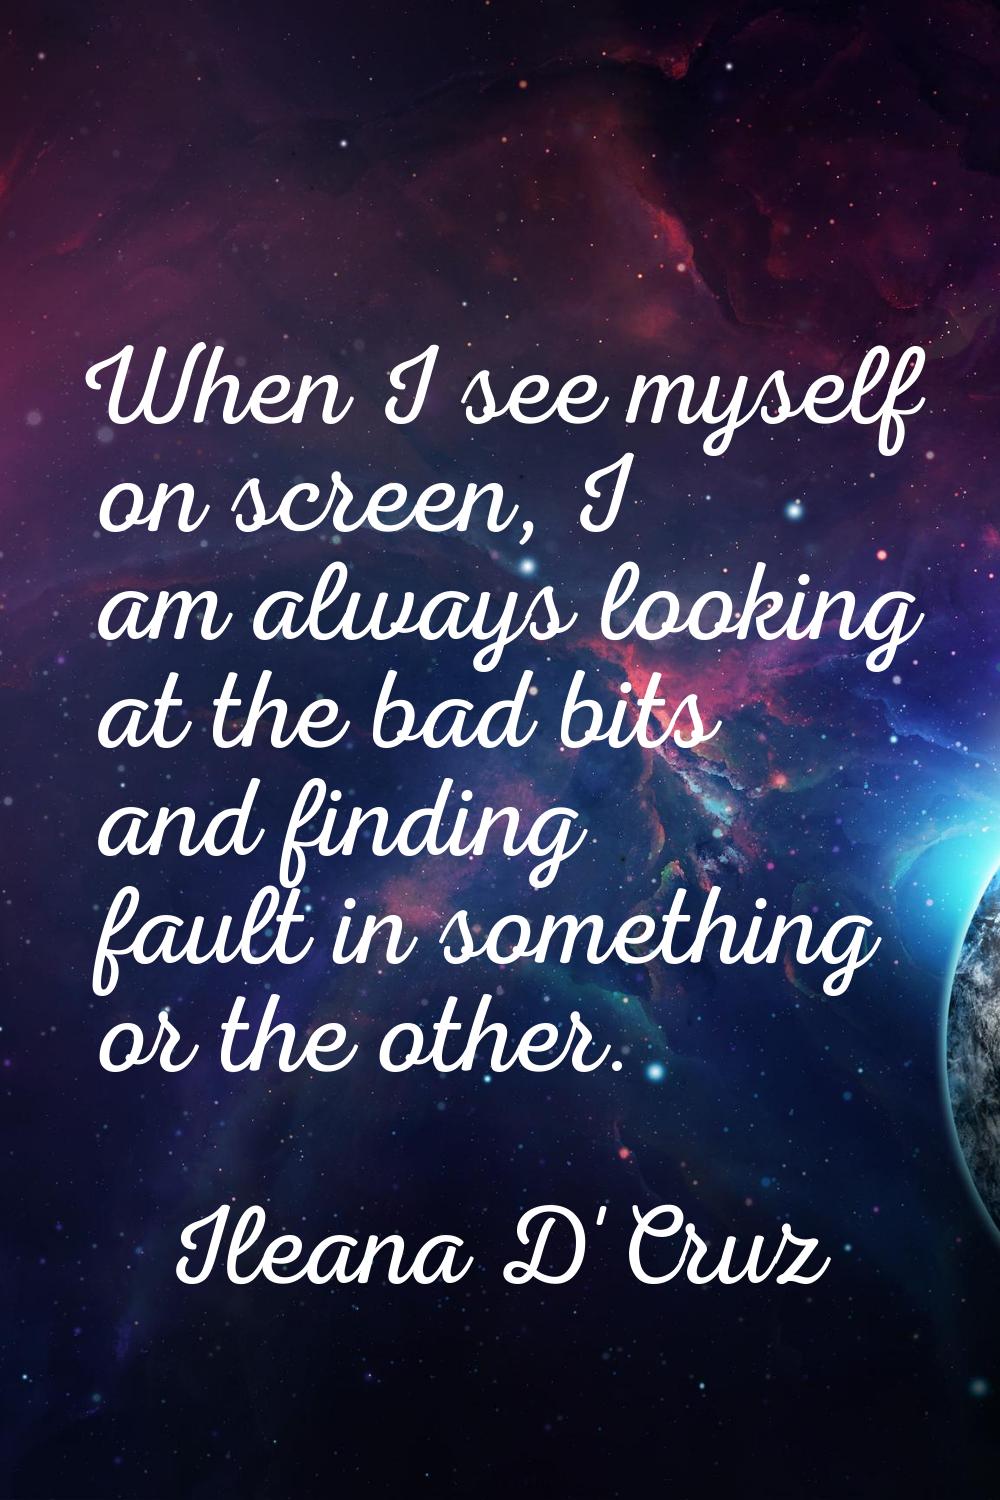 When I see myself on screen, I am always looking at the bad bits and finding fault in something or 